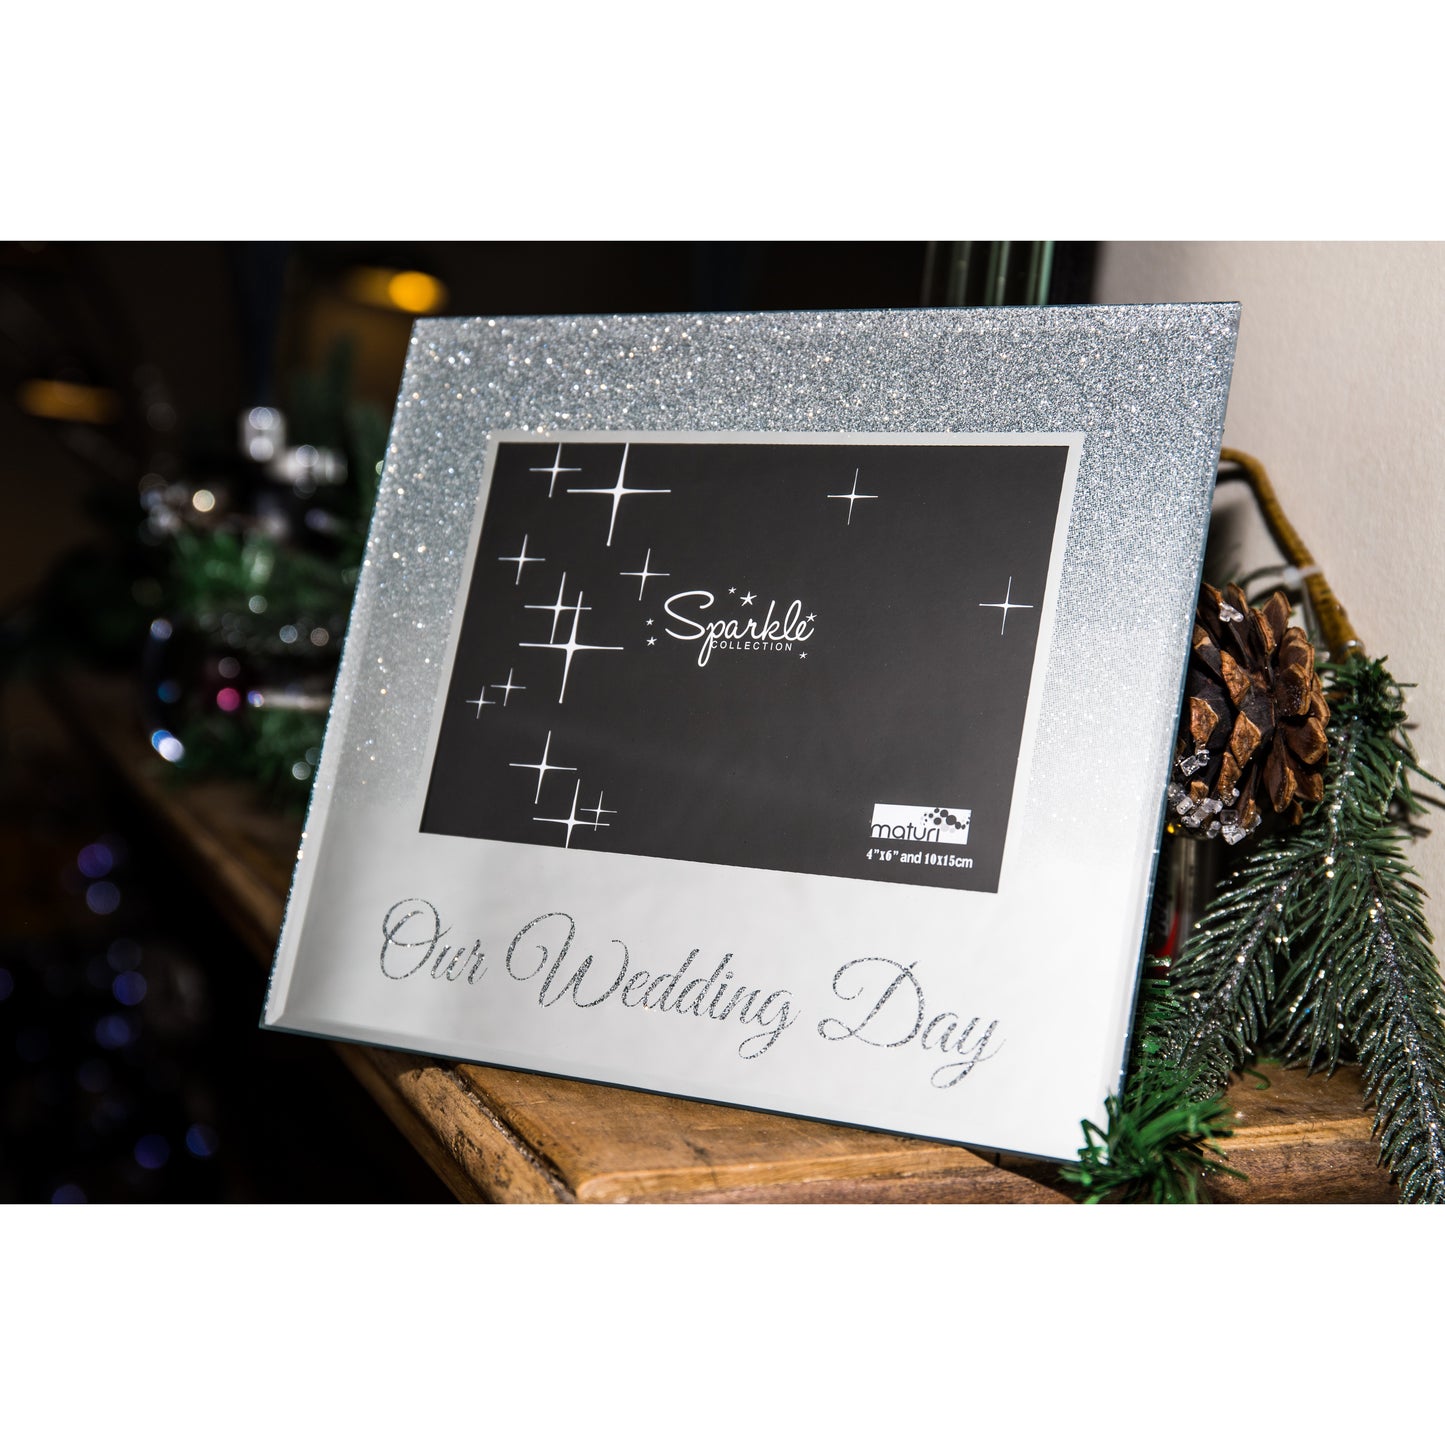 Our Wedding Day Mirrored Silver Glitter 6 x 4 Inch Photo Frame